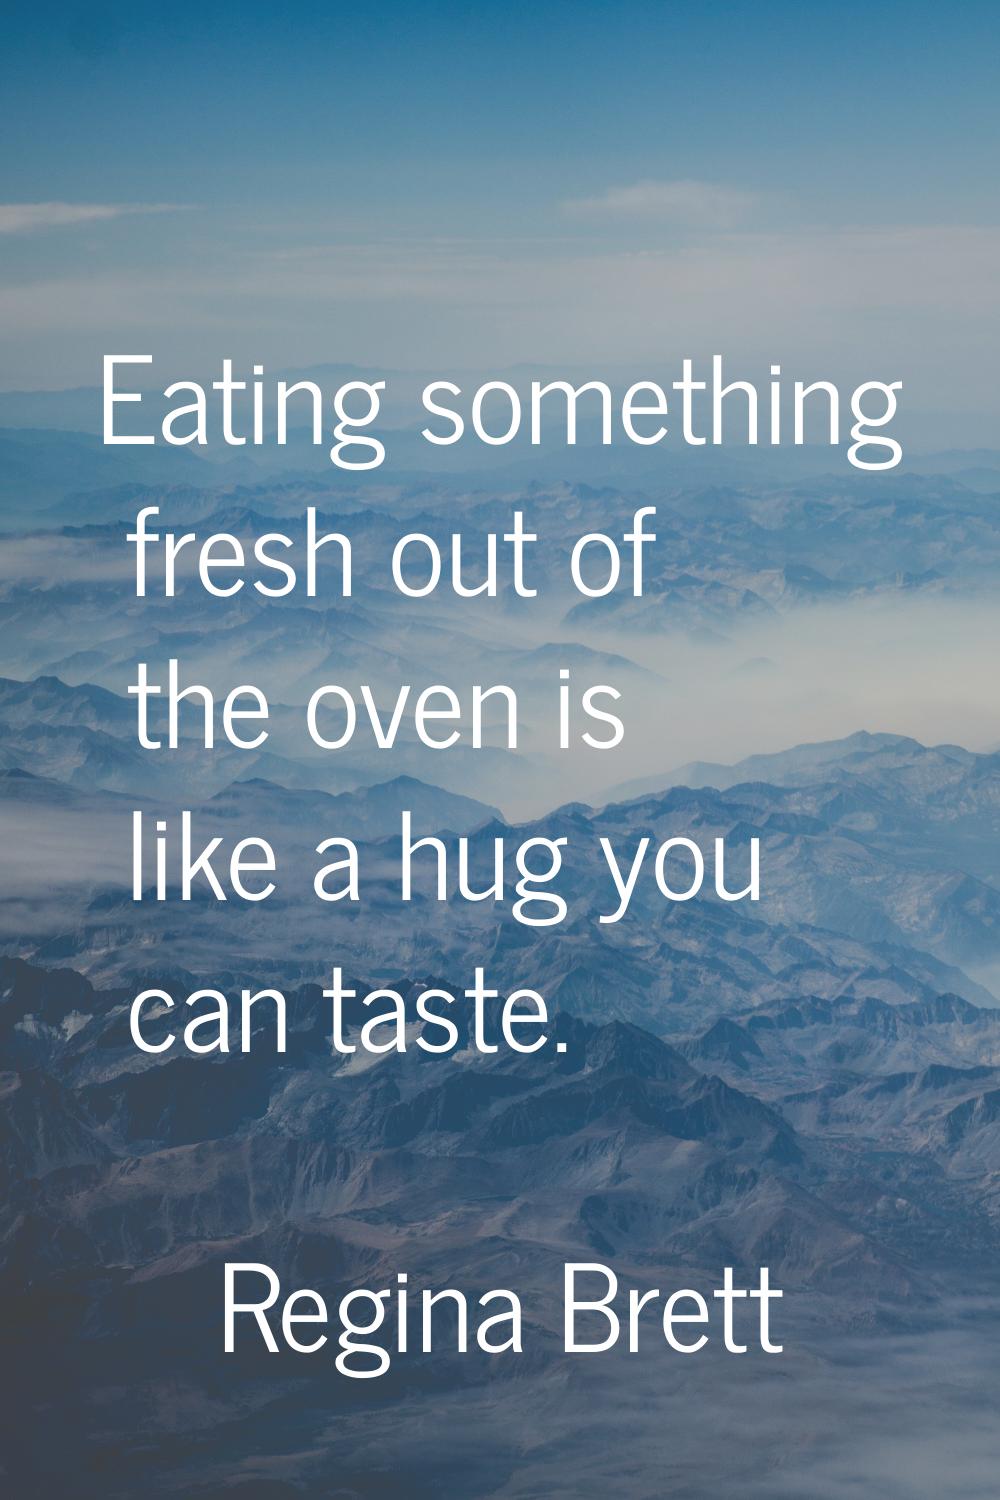 Eating something fresh out of the oven is like a hug you can taste.